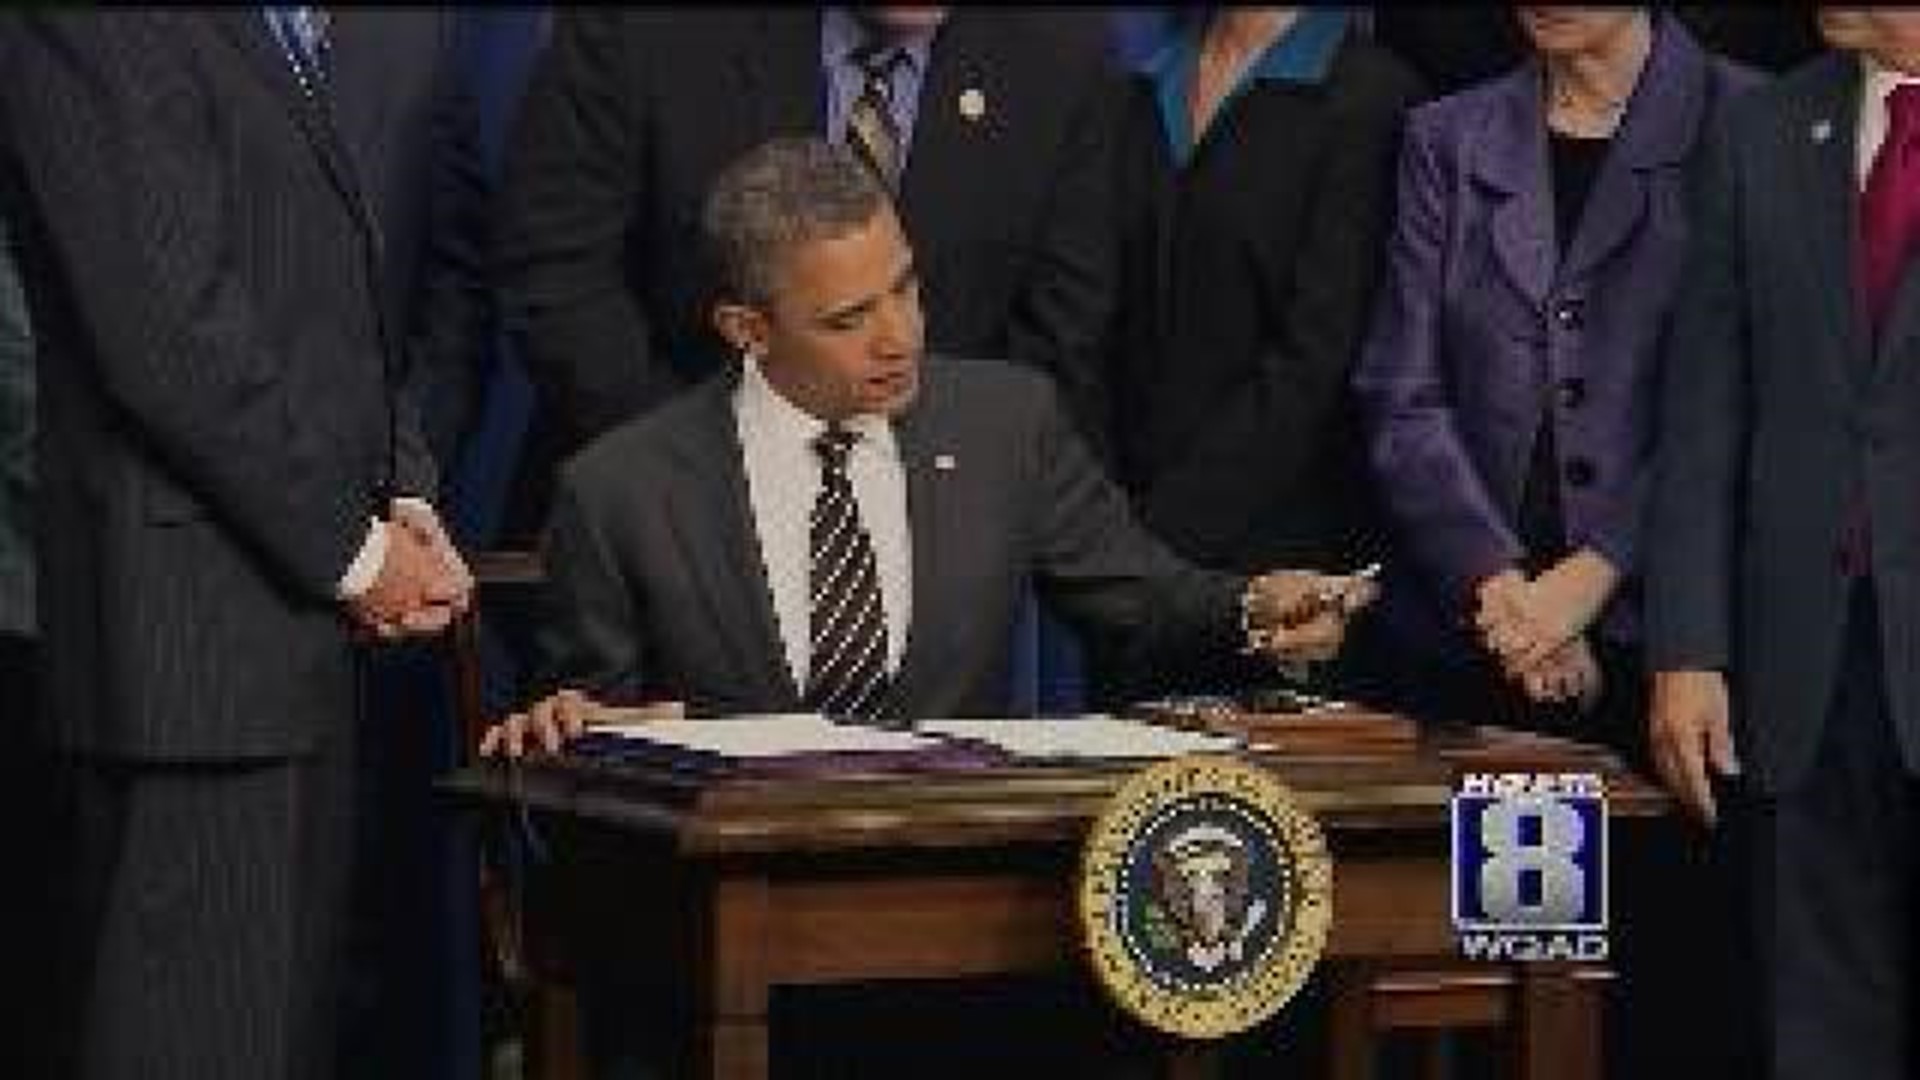 President signs STOCK act into law